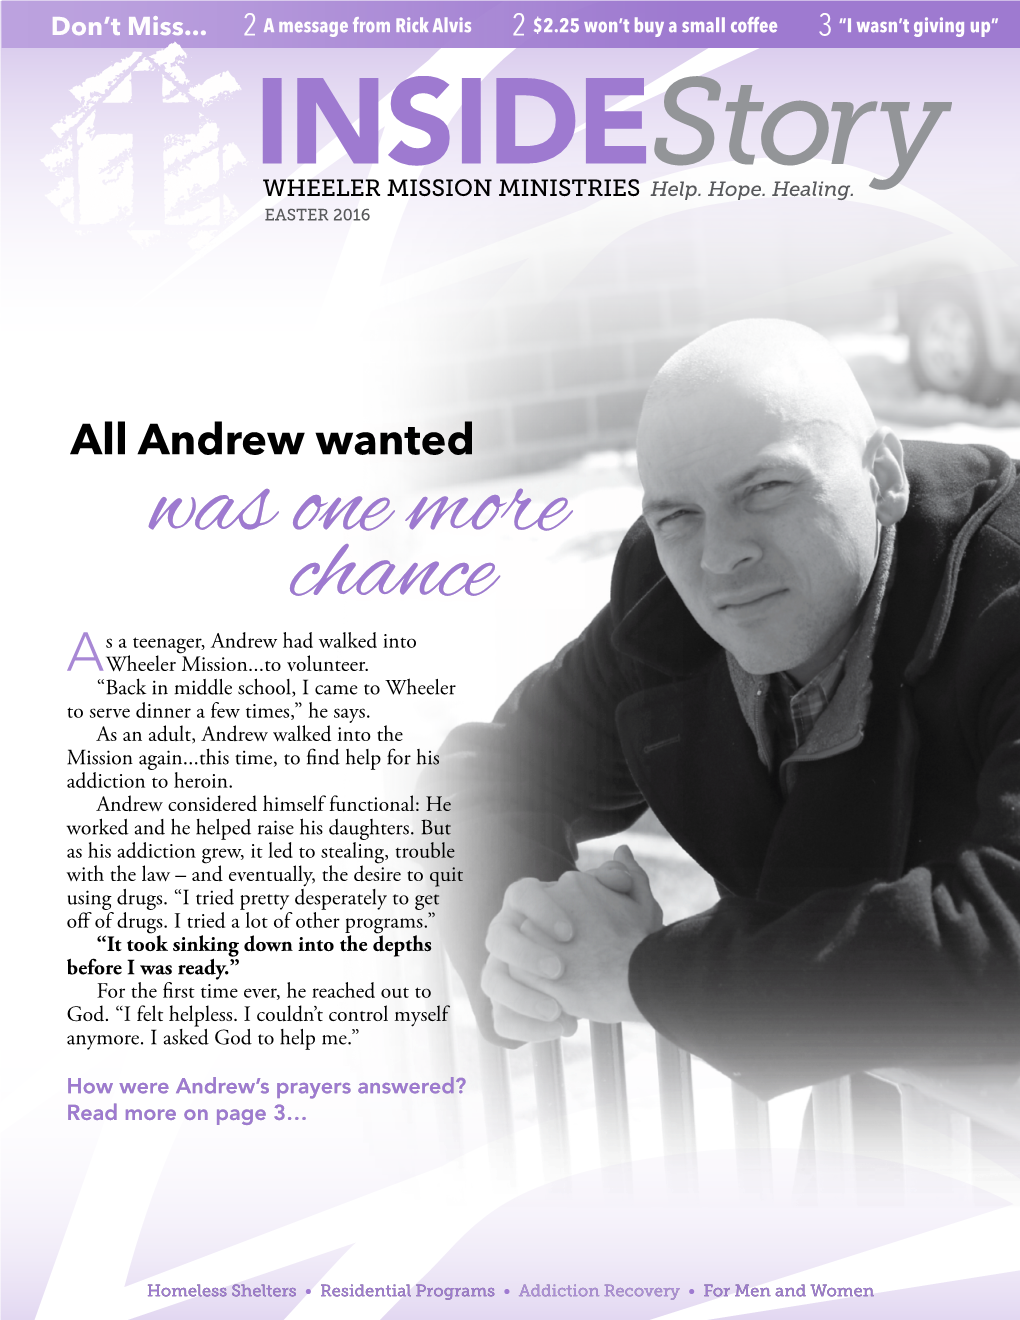 Was One More Chance S a Teenager, Andrew Had Walked Into Awheeler Mission...To Volunteer